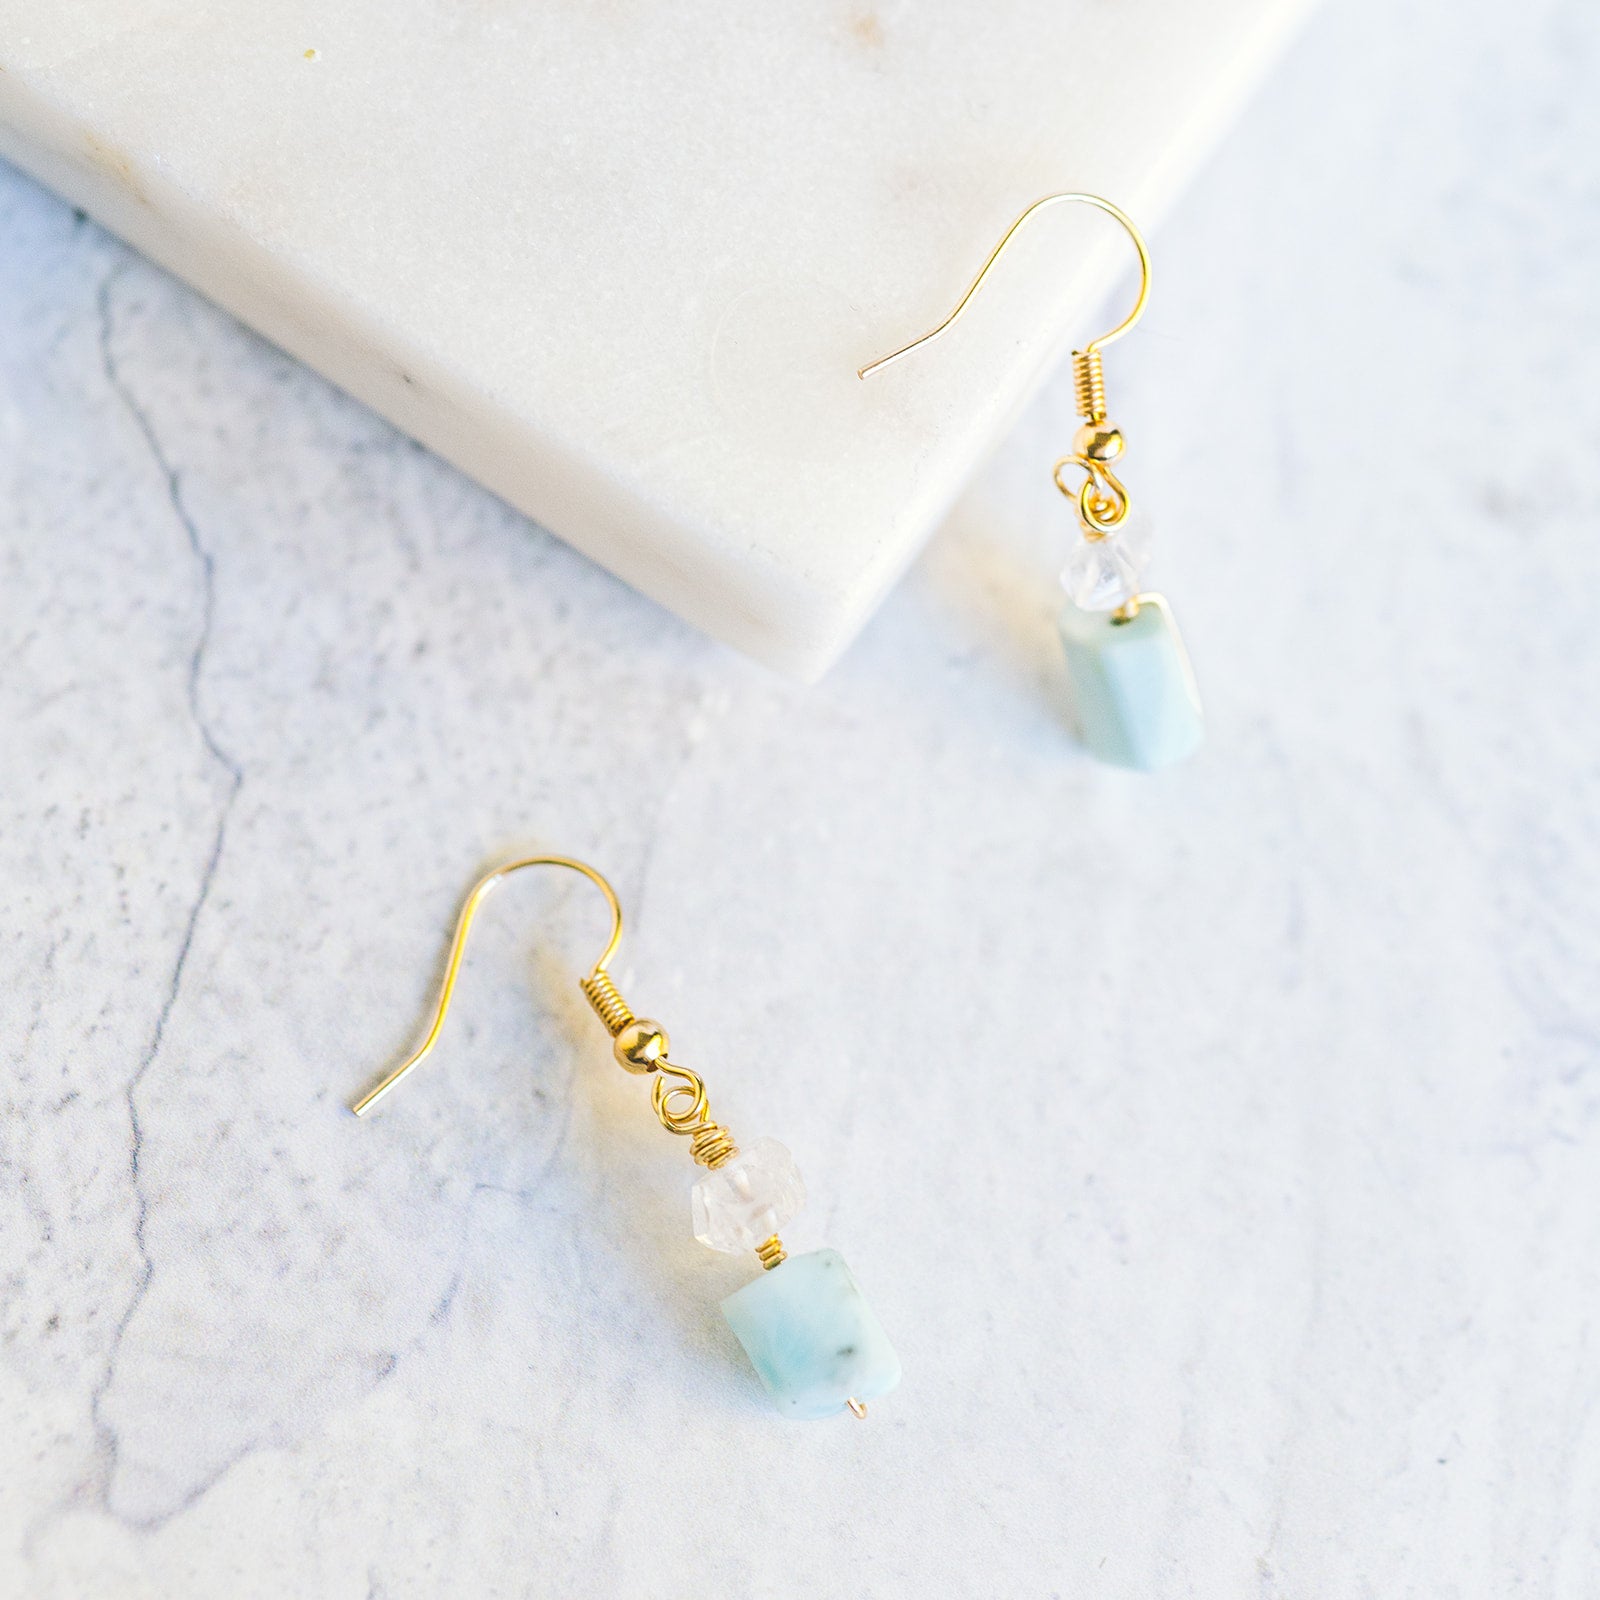 Wire Wrapped Crystal Earrings - Aquamarine and Herkimer Diamond